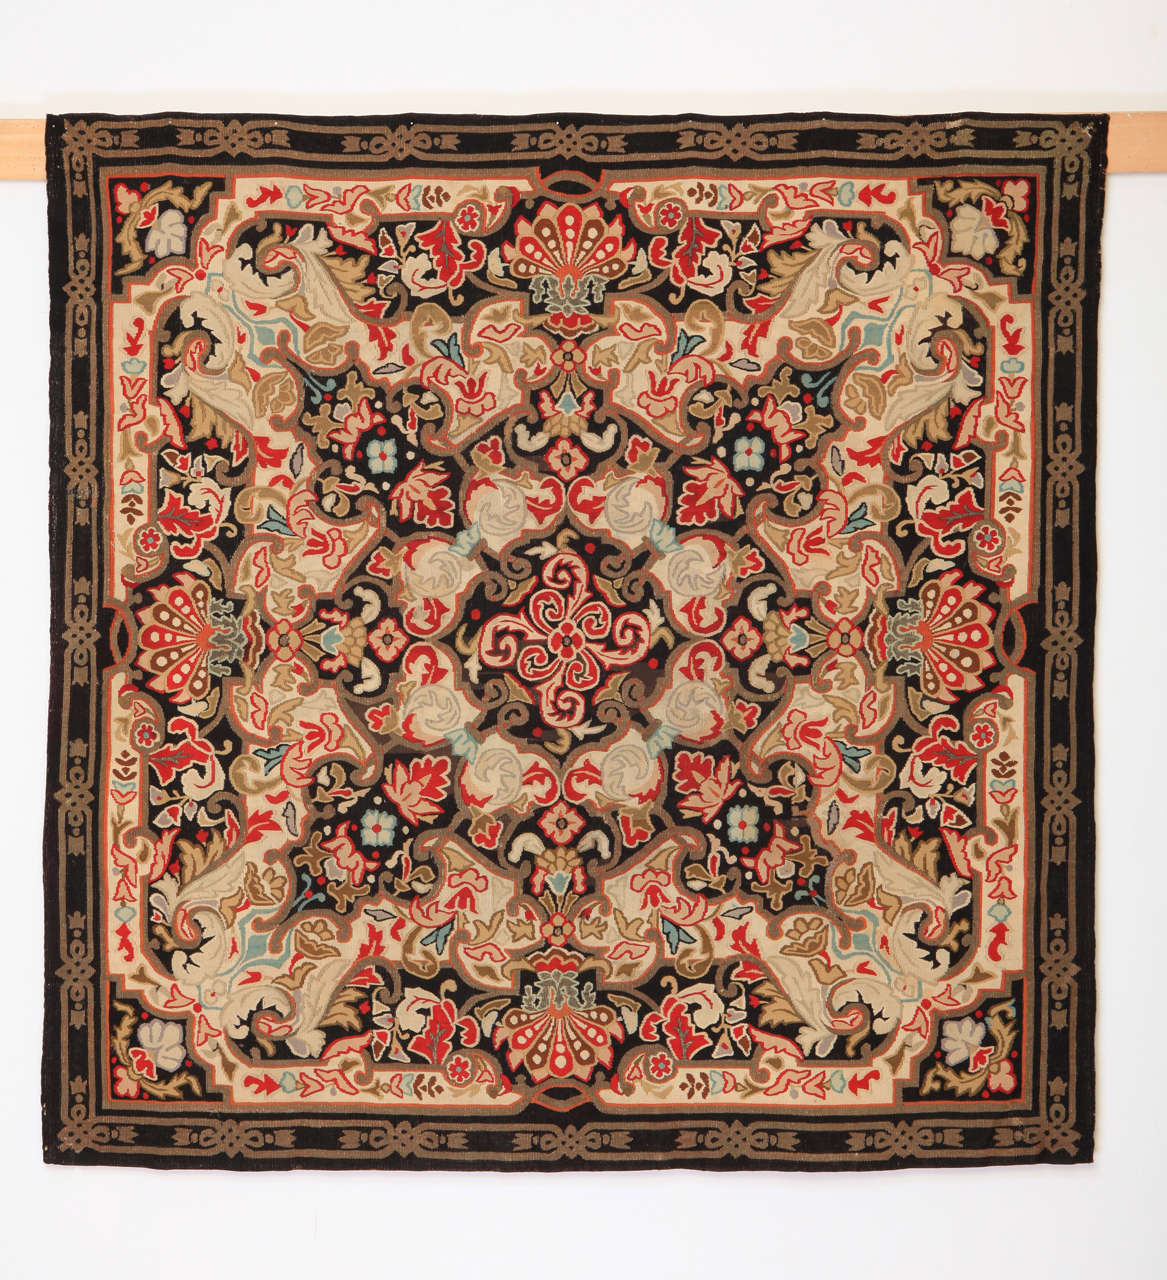 Aubusson rugs that were woven after the Restauration period distinguish themselves by a richer palette, as well as for employing architectural motifs often inspired by the ceiling decorations of the palaces from the Louis XIV-Louis XVI period.
This